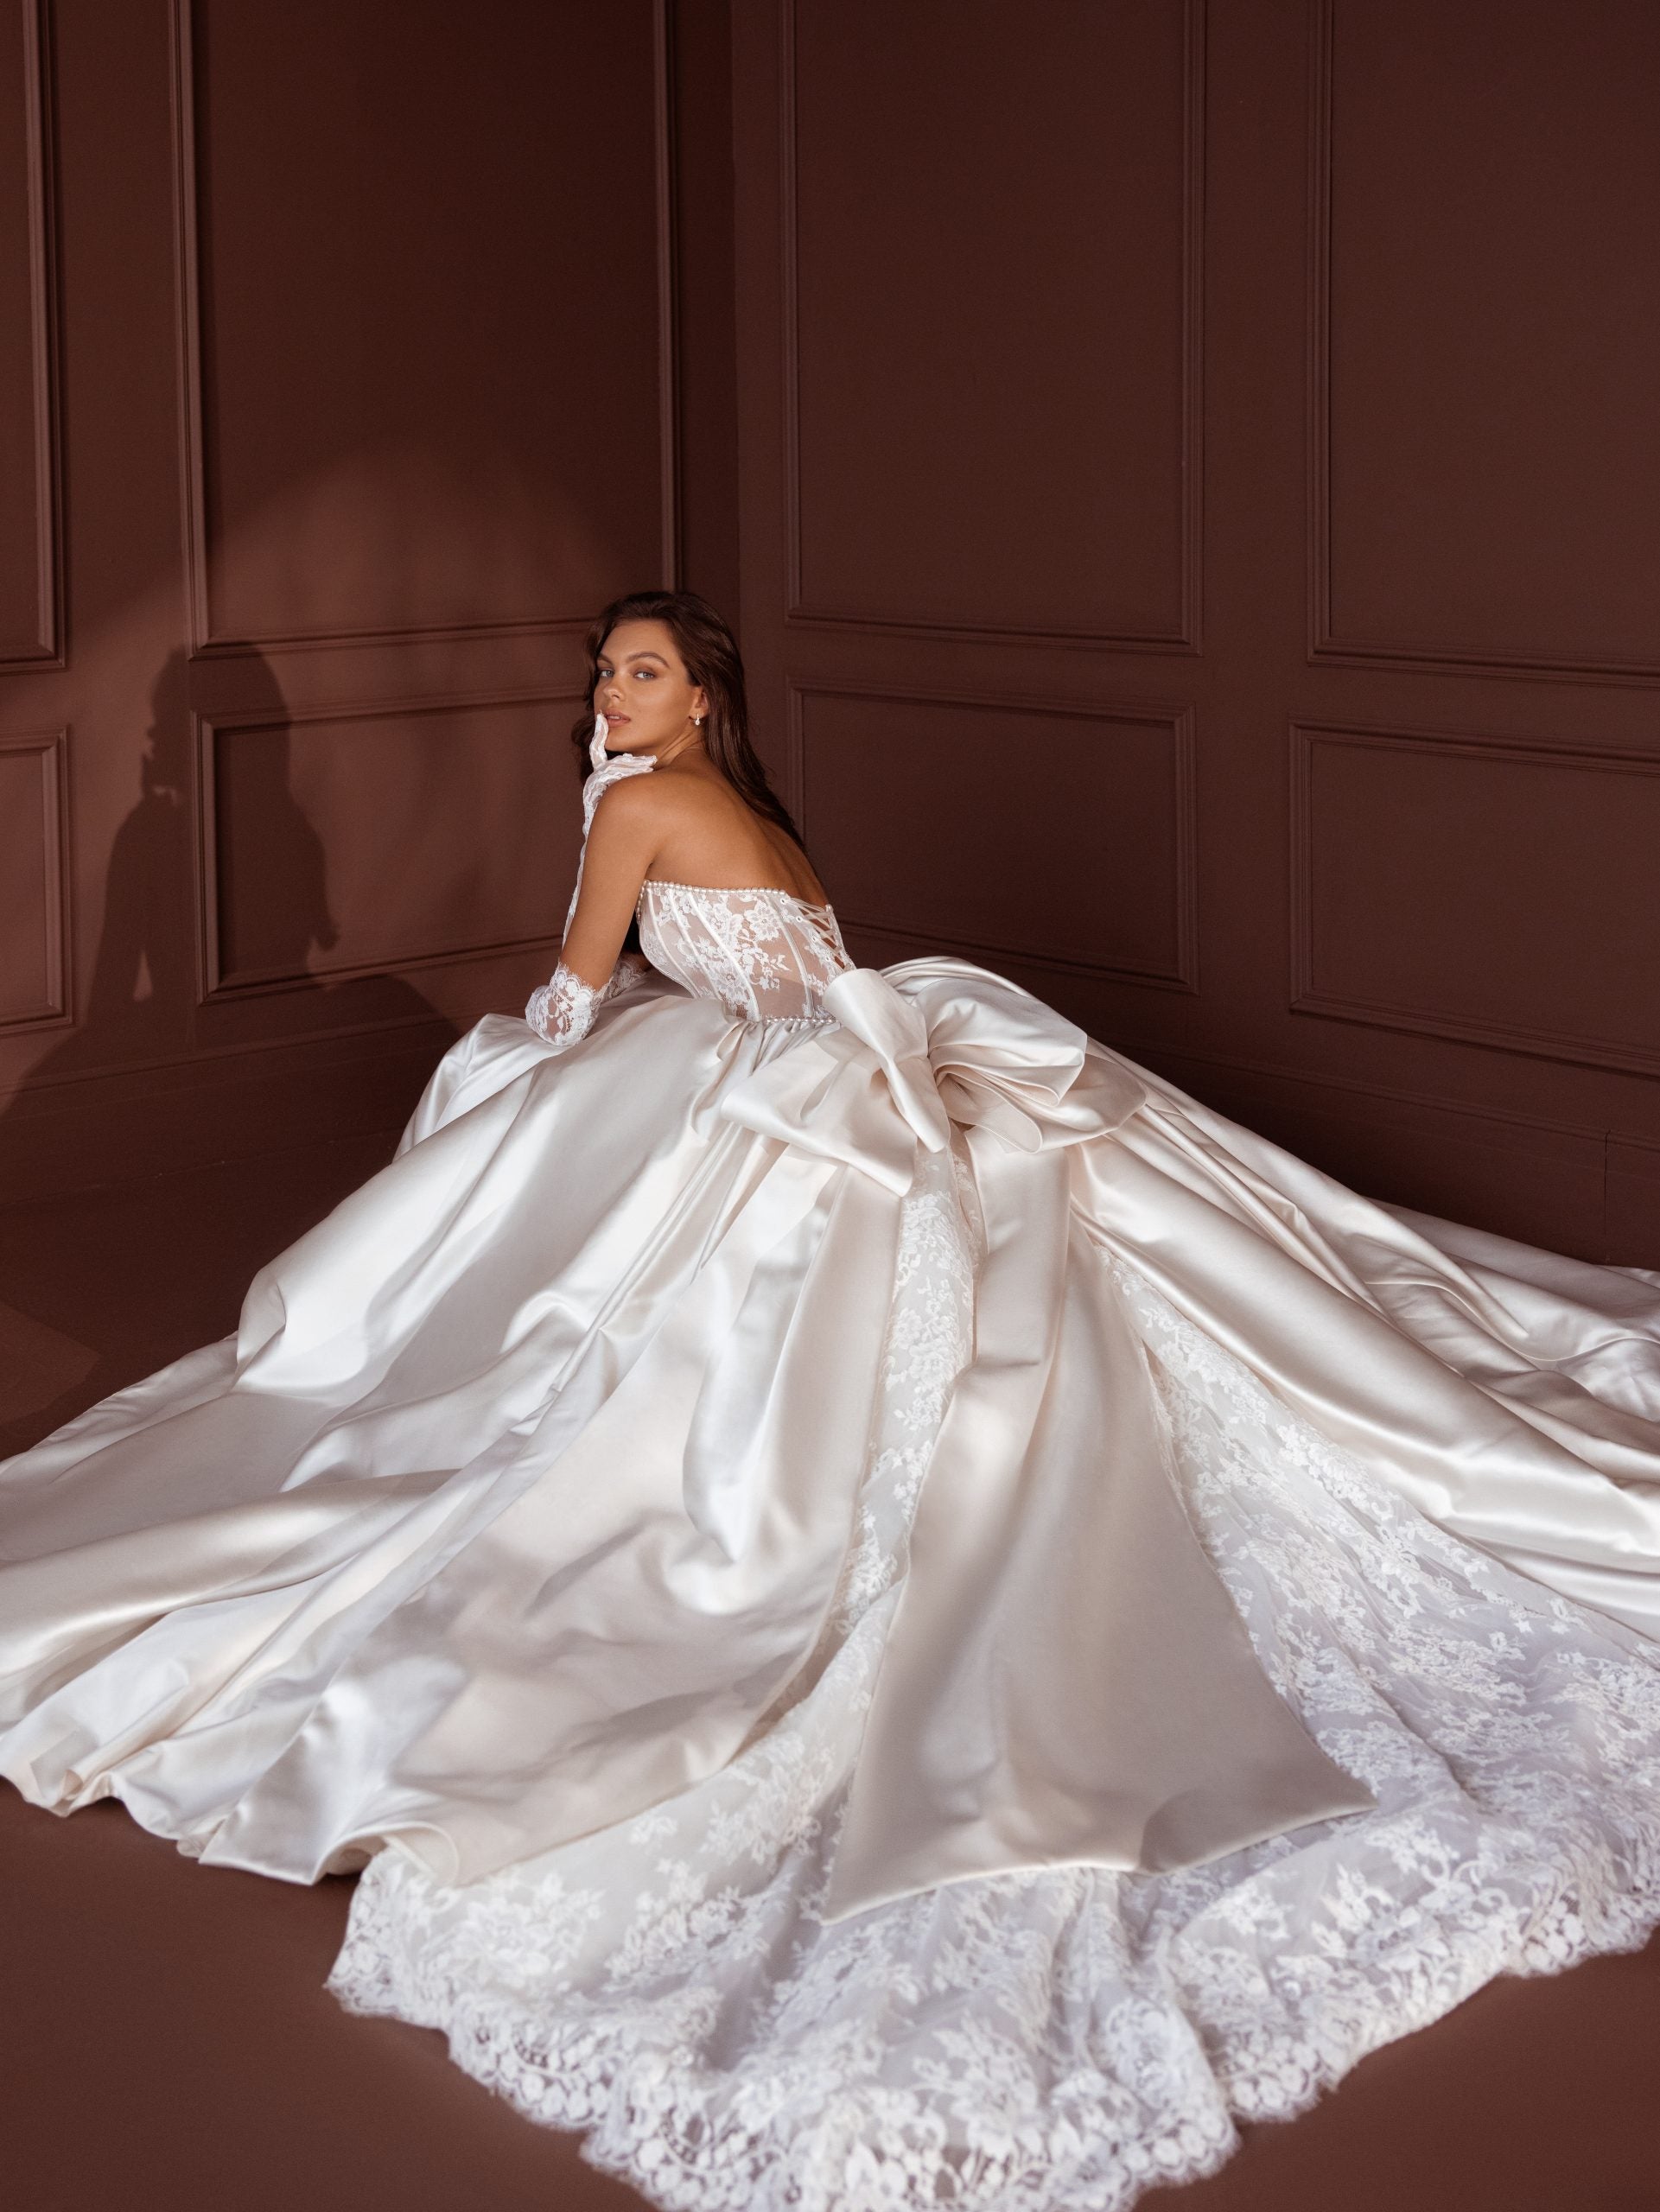 Strapless ballgown with sheer Alençon lace bodice by Pnina Tornai - Image 2